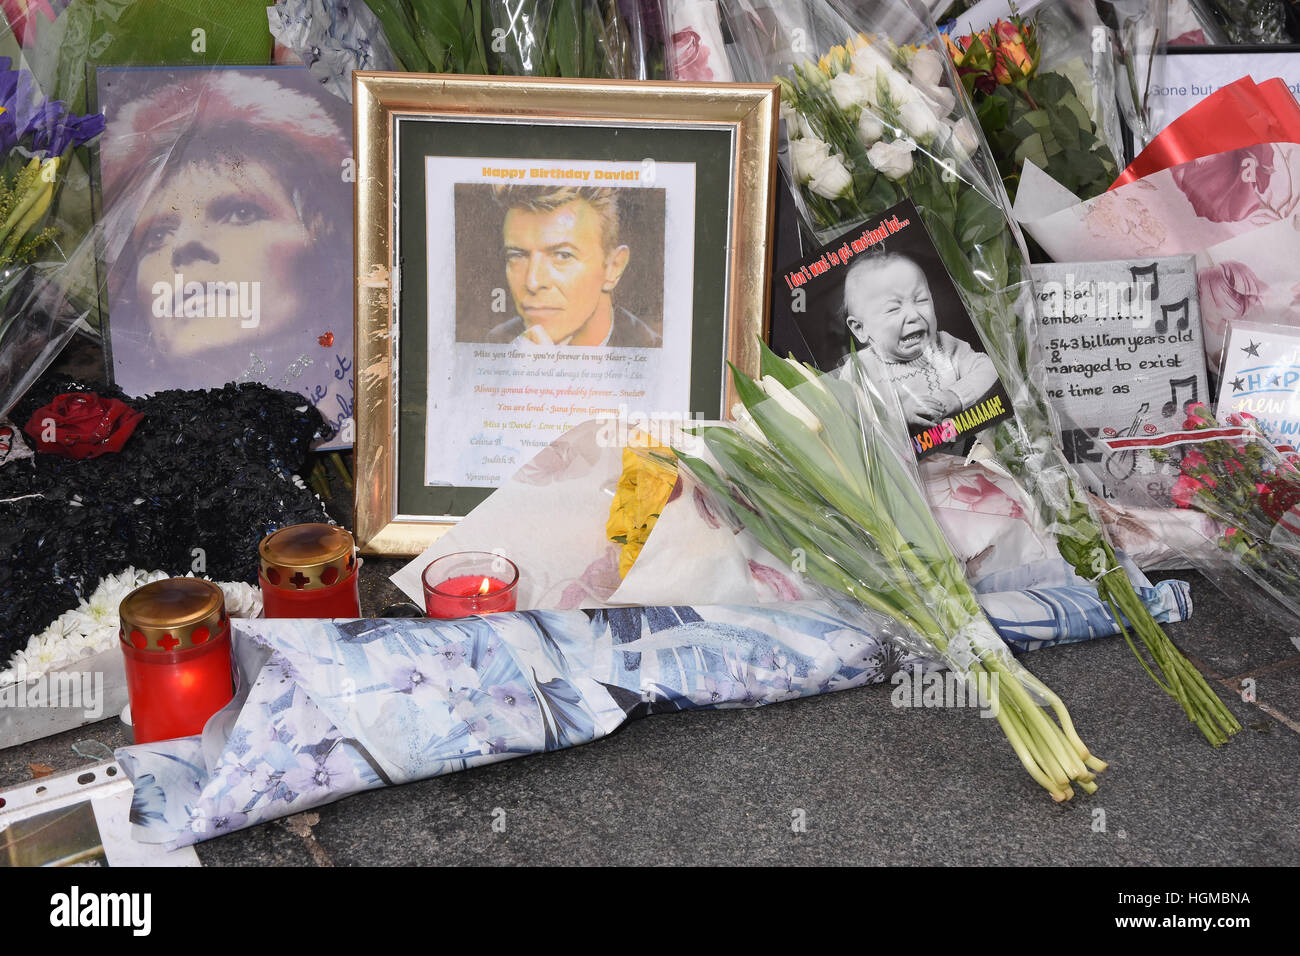 Floral tributes left by fans of David Bowie on the first anniversary of his death,Brixton,London UK Stock Photo